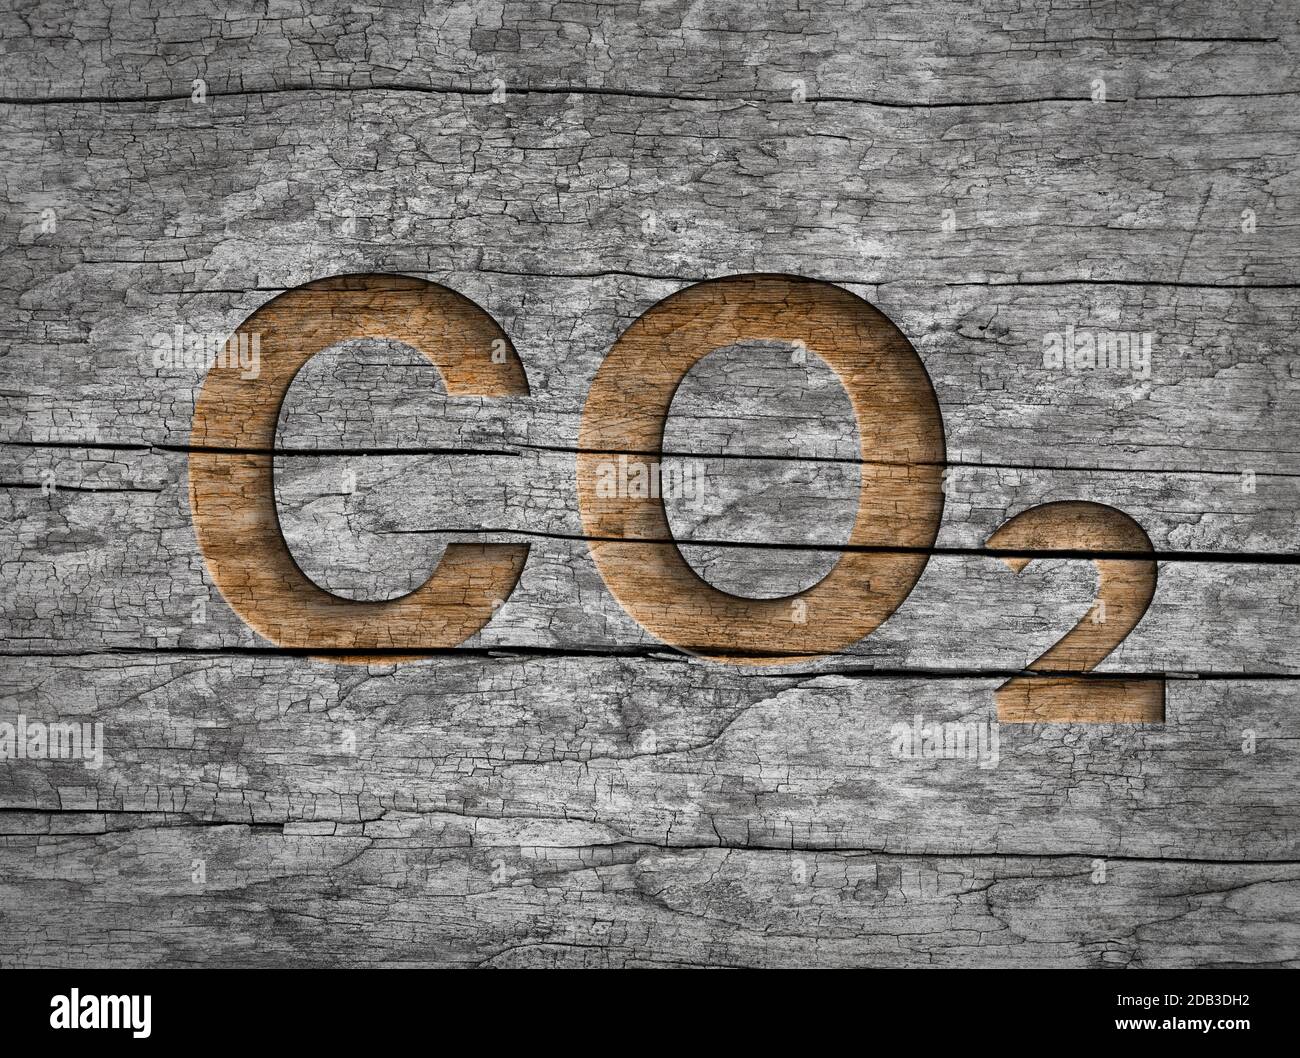 Co2 text written in wood for natural storage carbon dioxide emission or compensation Stock Photo